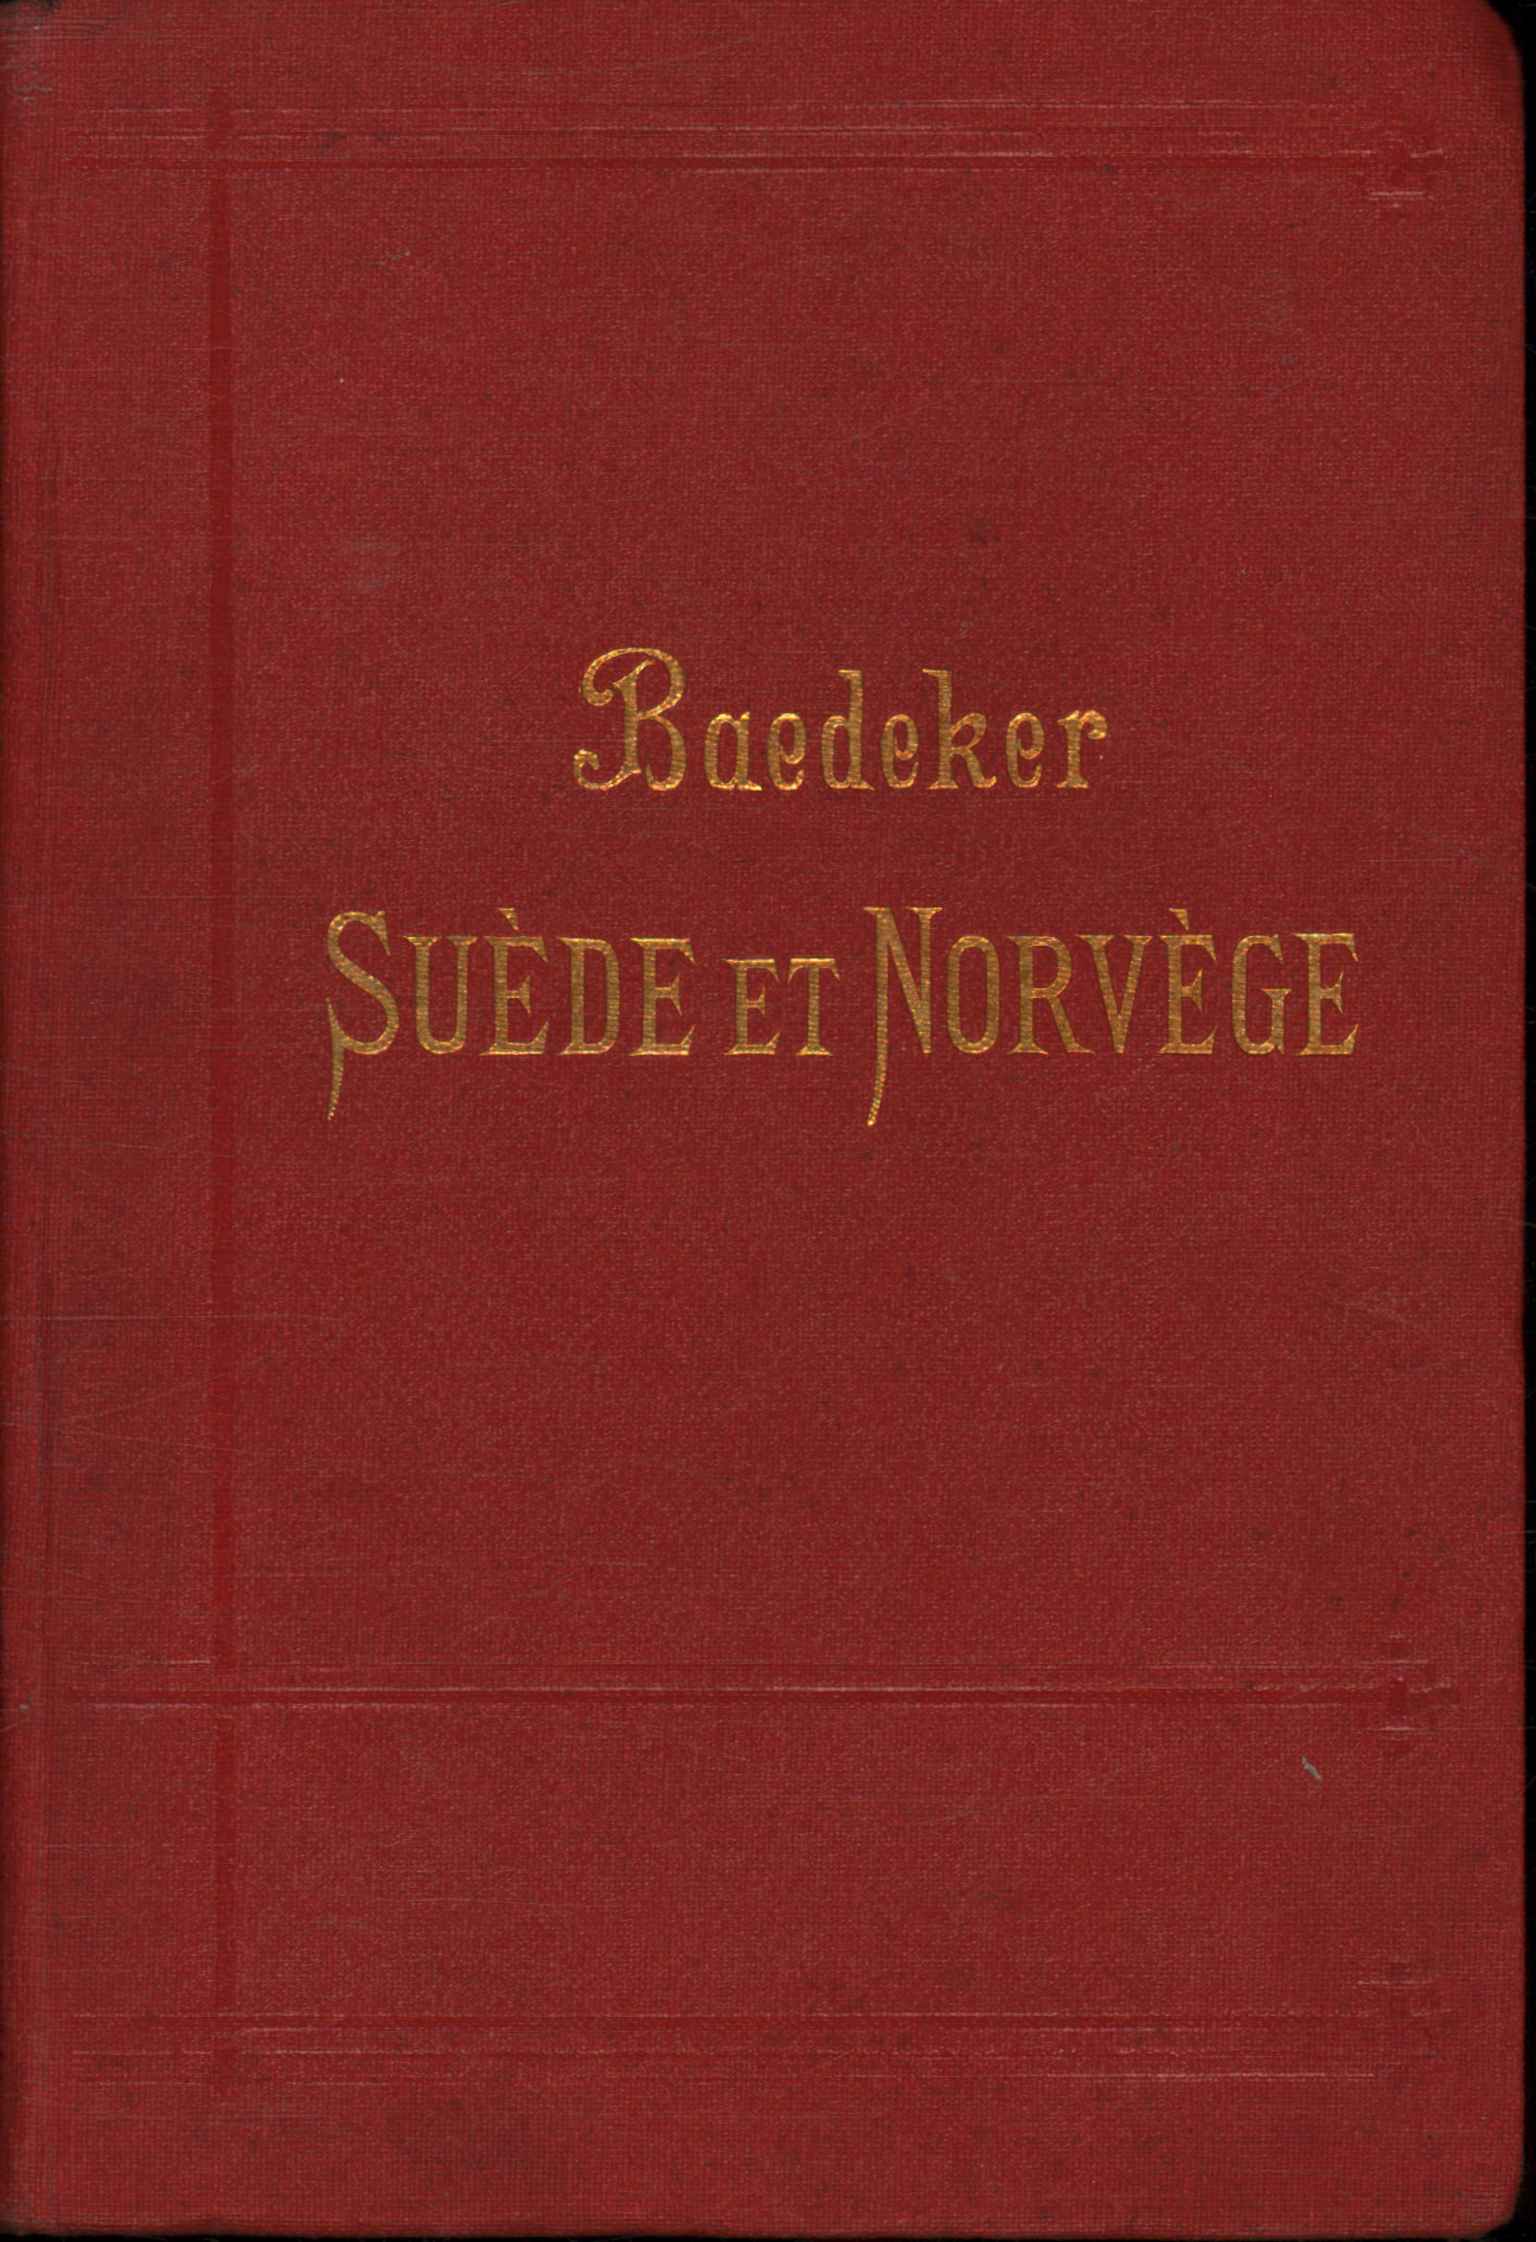 Suede and Norway